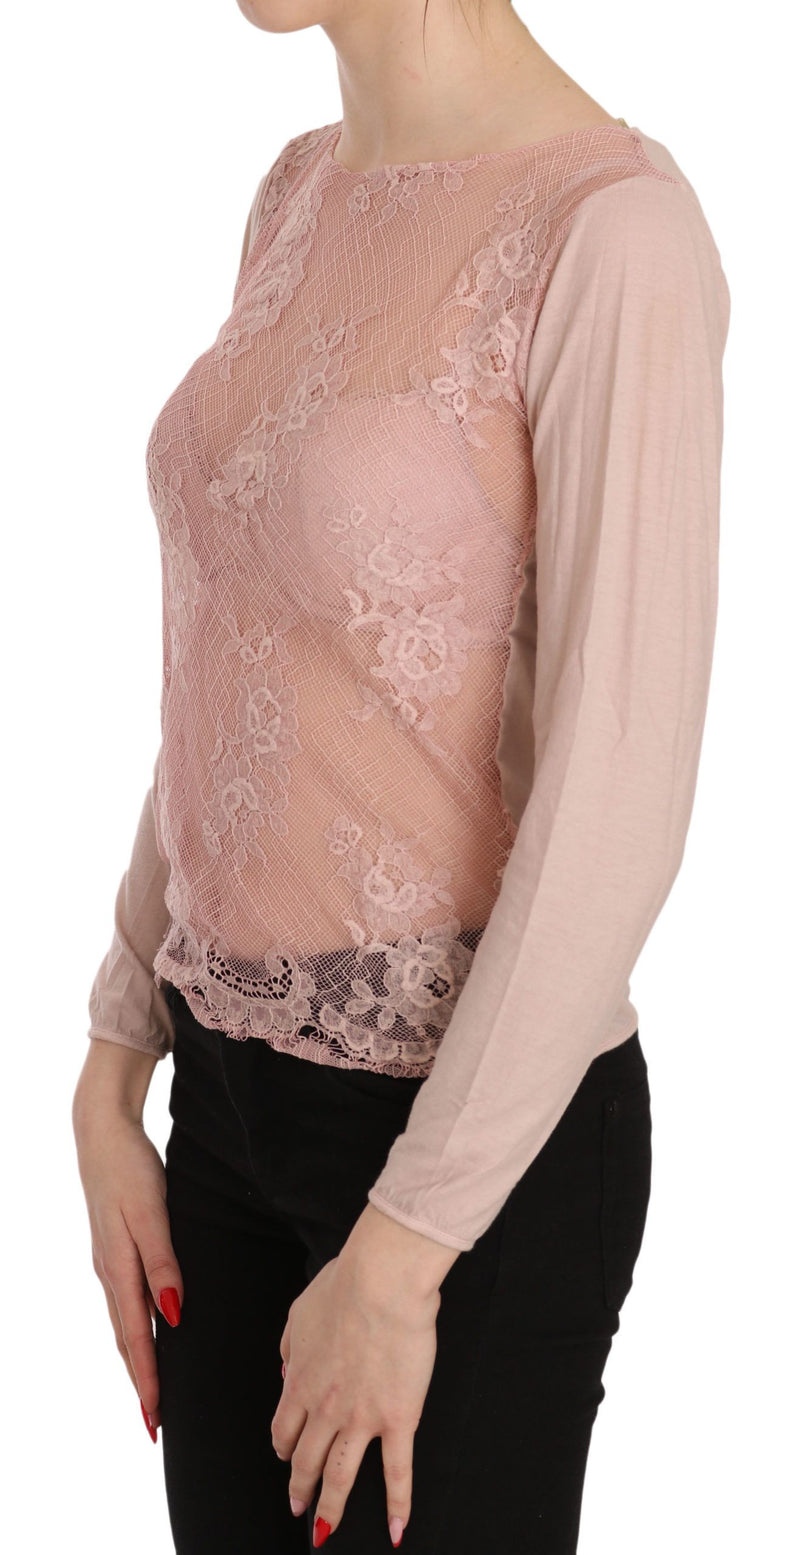 PINK MEMORIES Pink Lace See Through Long Sleeve Top Women's Blouse